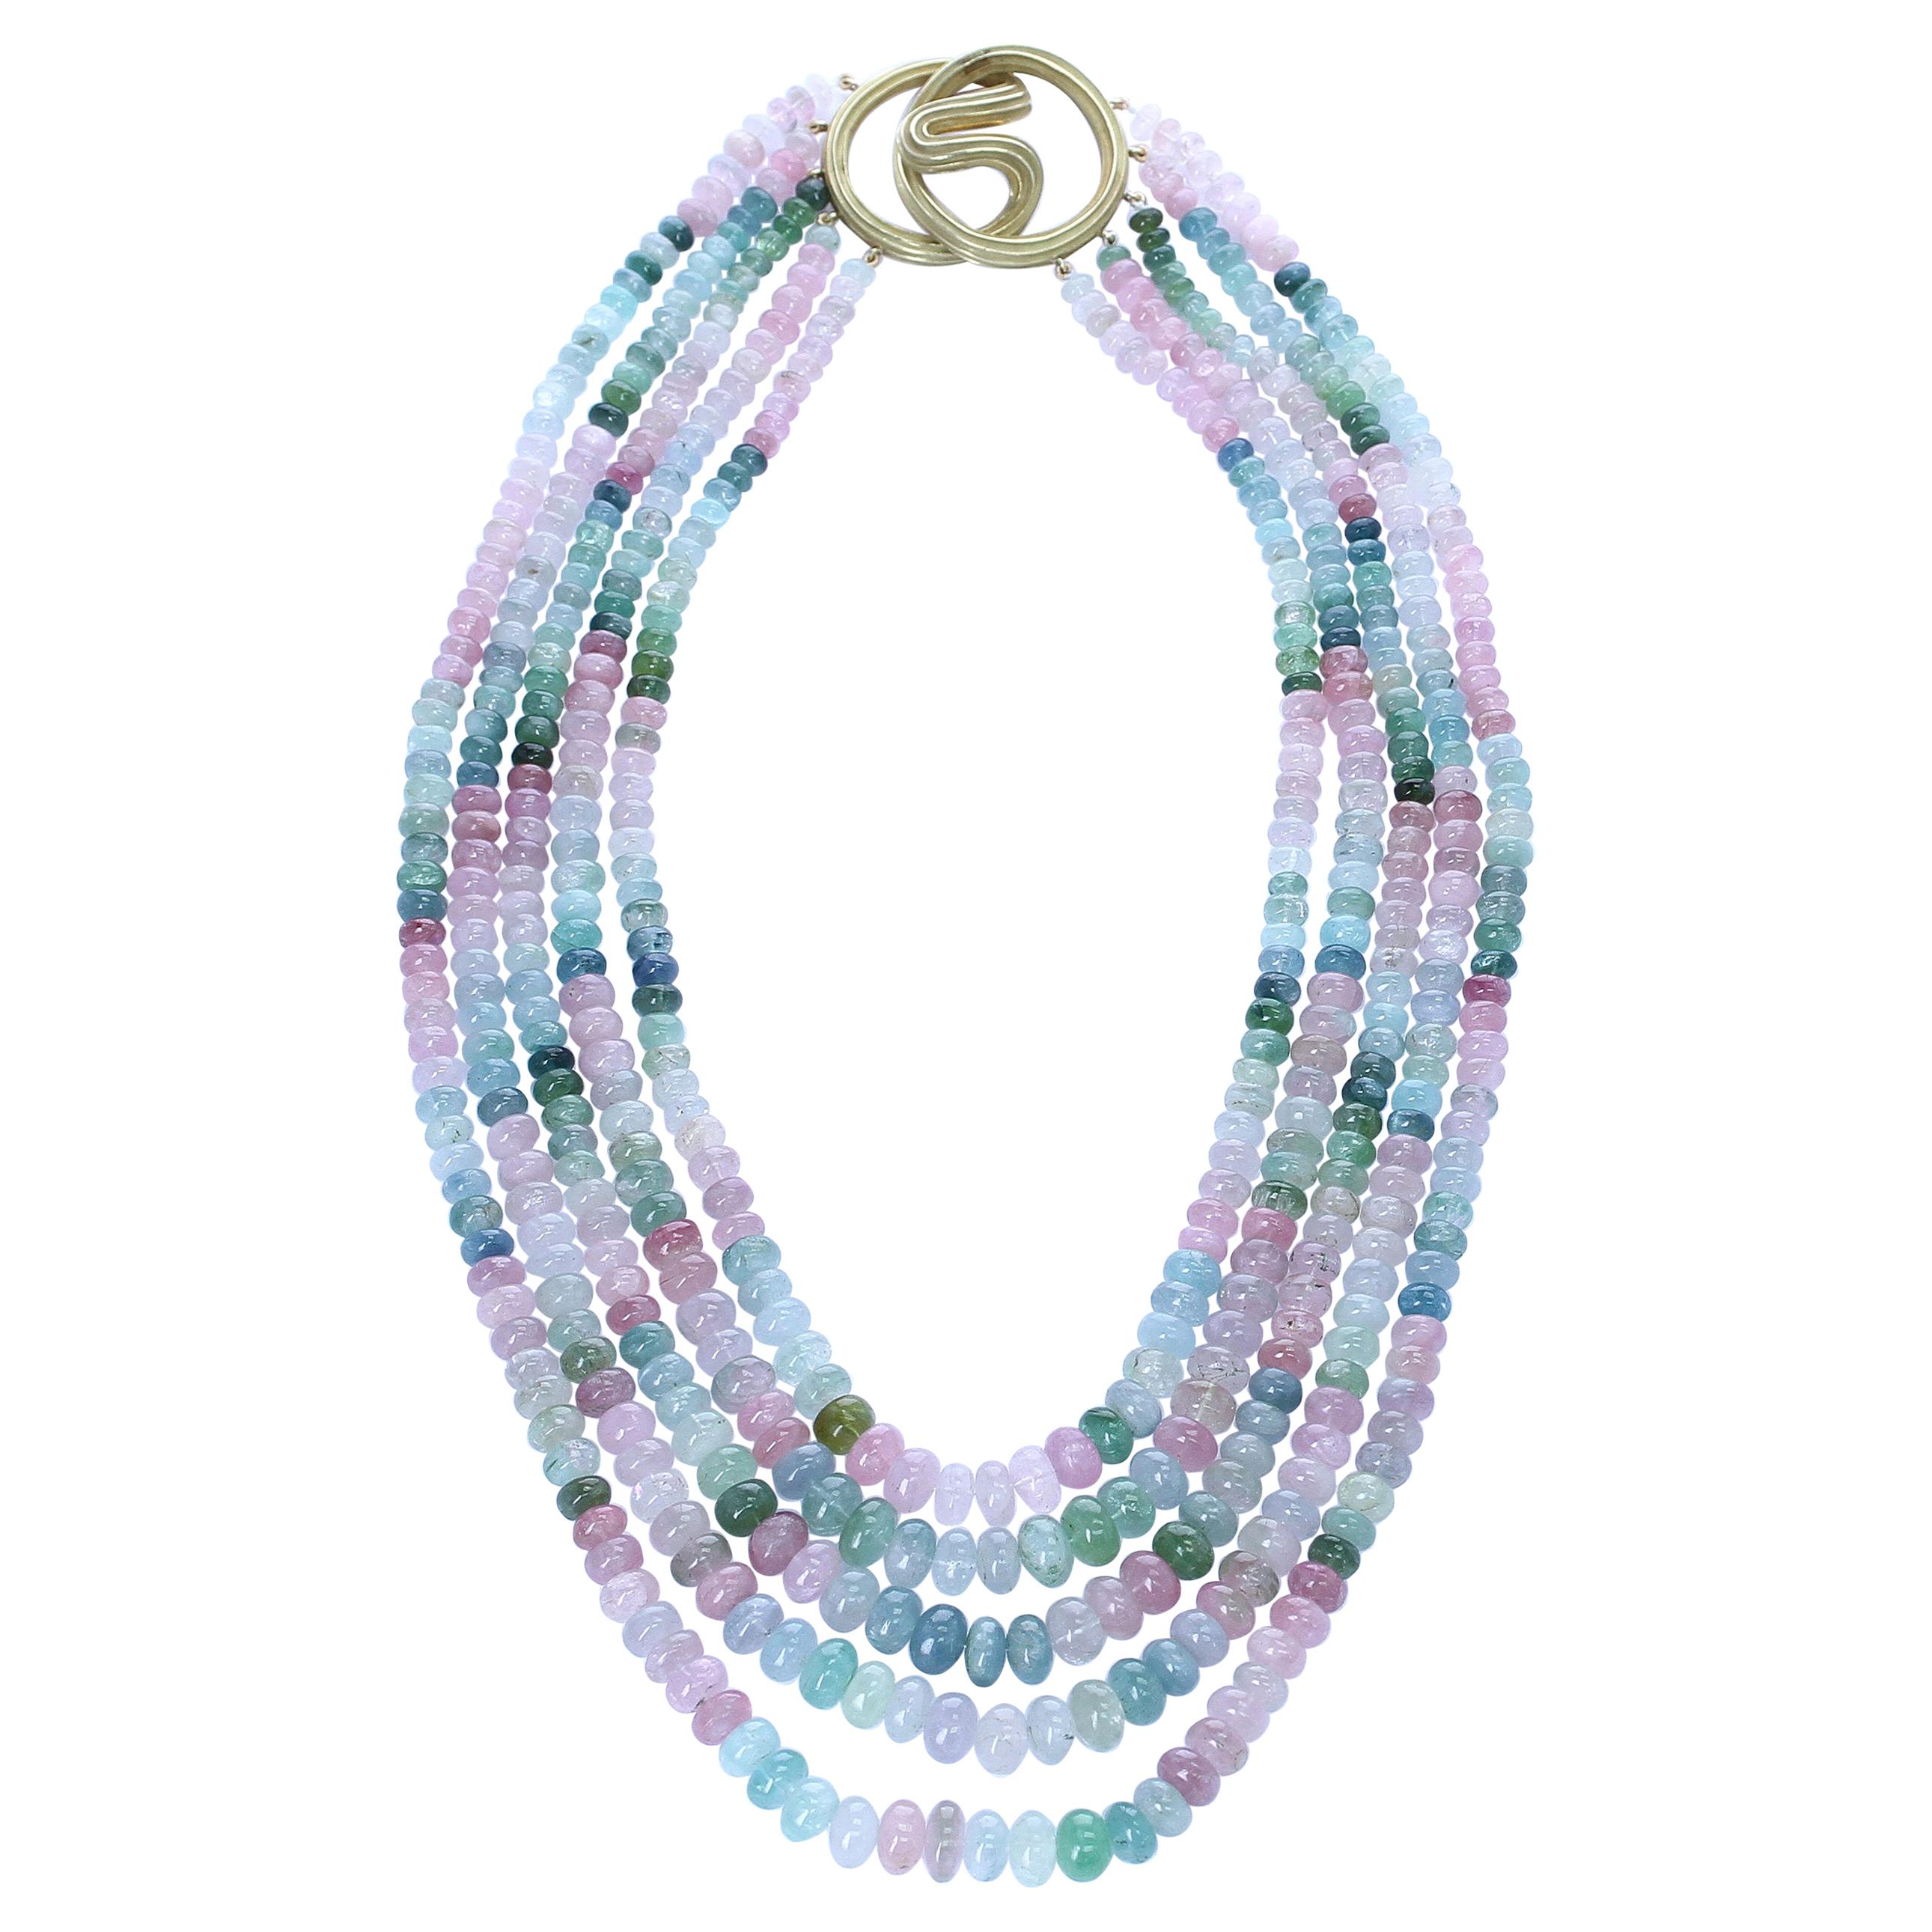 Natural Plain Multi-Tourmaline Bead Necklace, Clasp by Christopher Walling